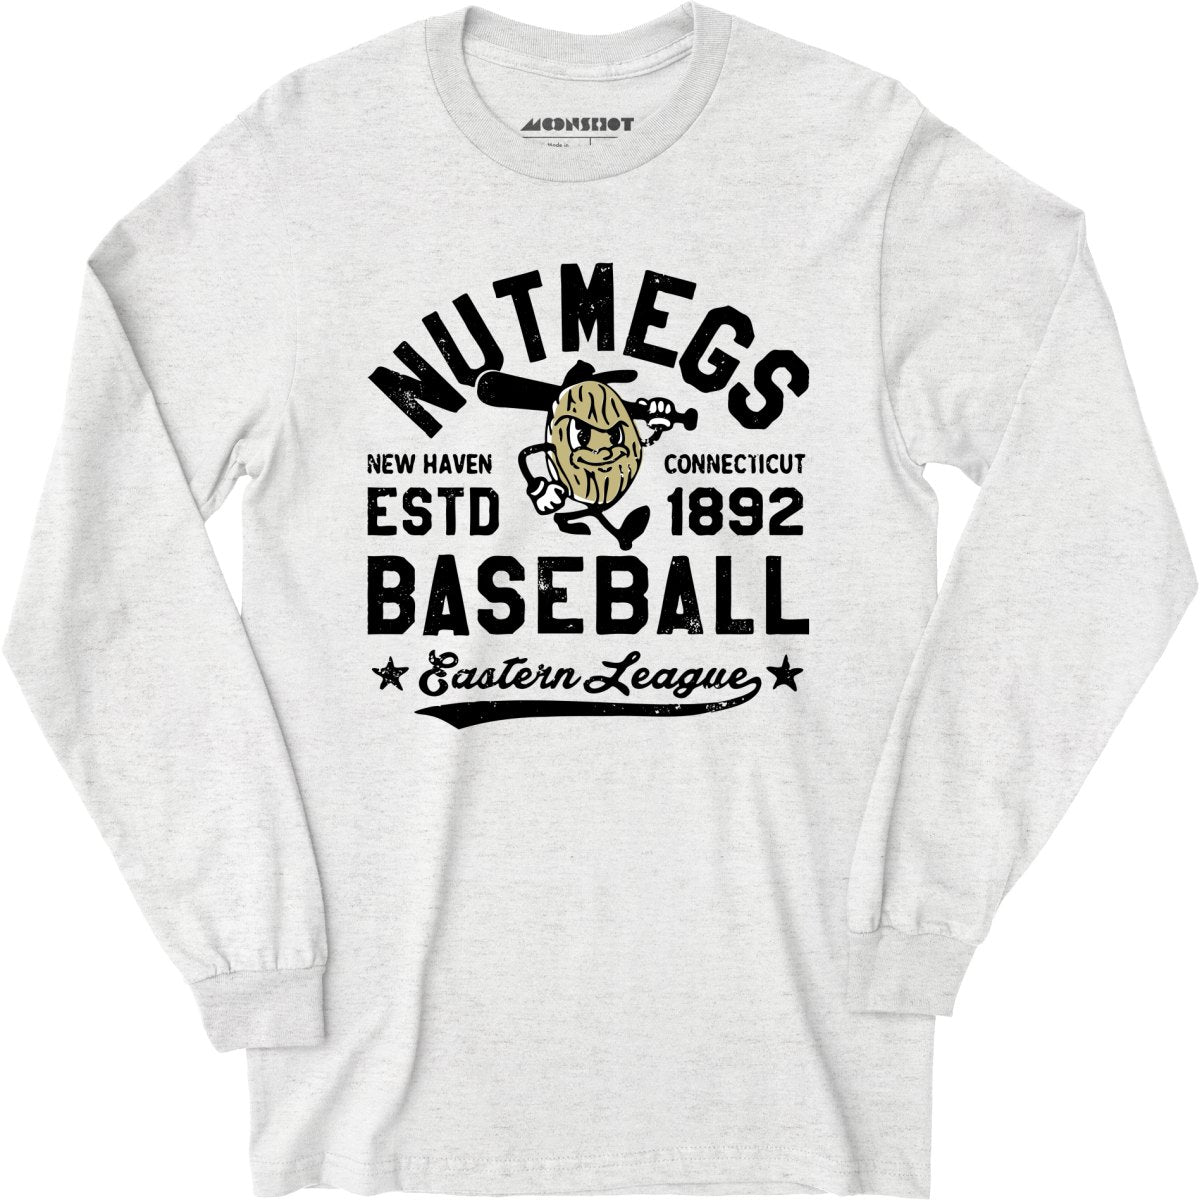 New Haven Nutmegs - Connecticut - Vintage Defunct Baseball Teams - Long Sleeve T-Shirt